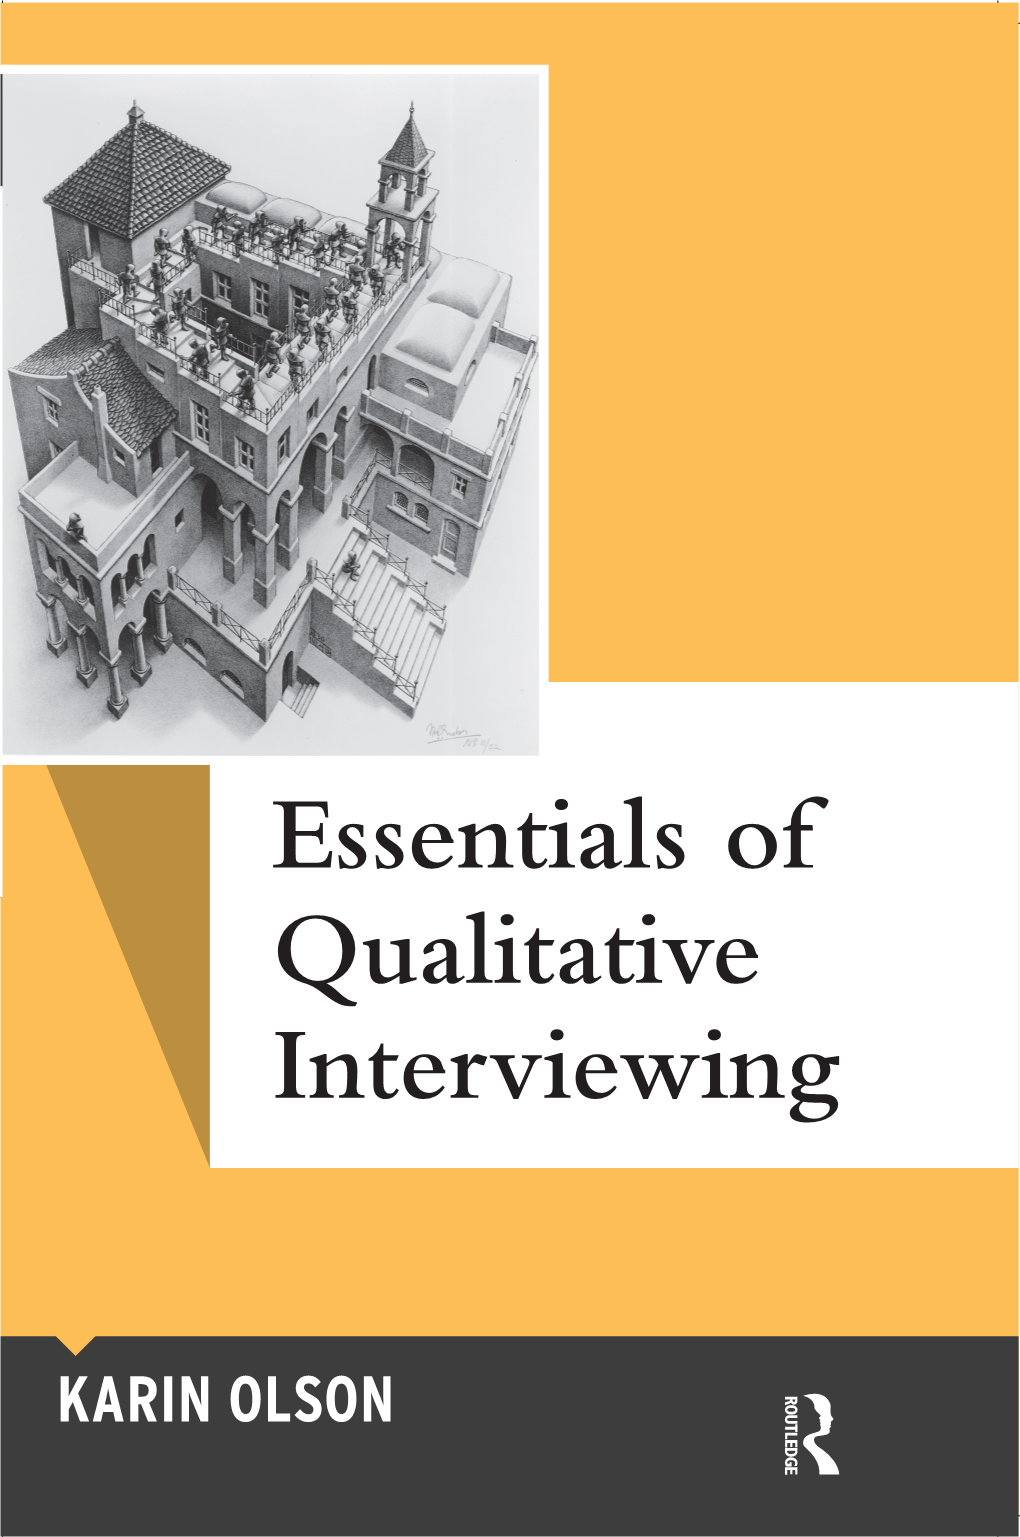 Essentials of Qualitative Interviewing Unstructured, Individual and Group—And Shows How and When to Use Each